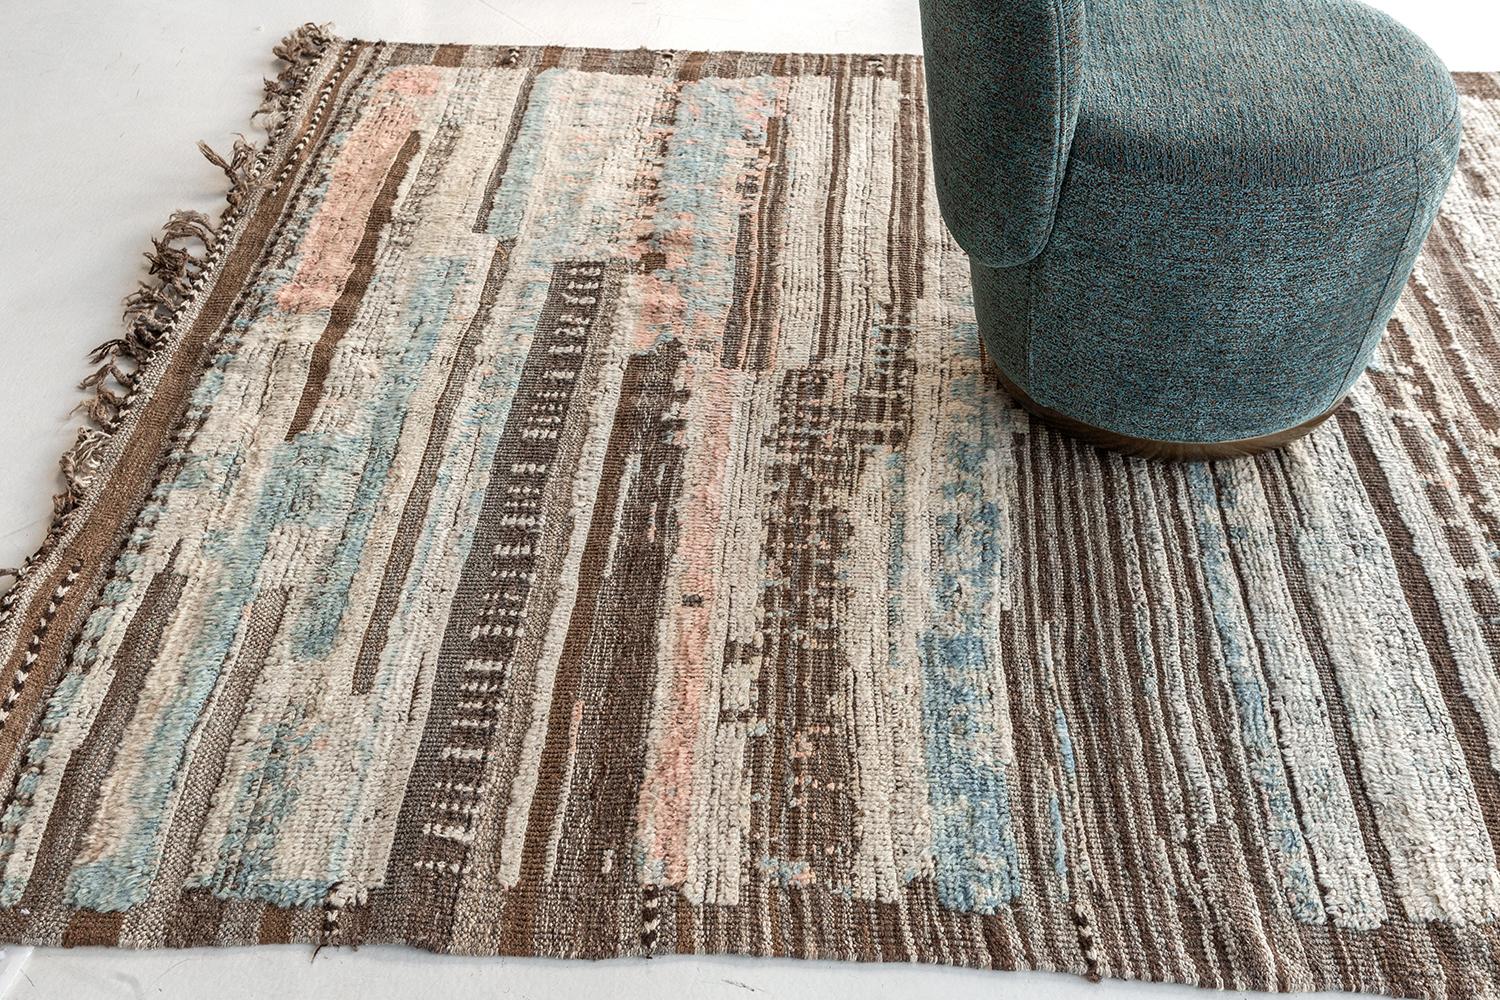 Featuring the remarkable texture and amazing play of neutral and pastel colour scheme, this breathtaking rug called Malaren’ from our Atlas collection exudes luxury and sophistication. The brilliant combination of cerulean blue and rose contributes